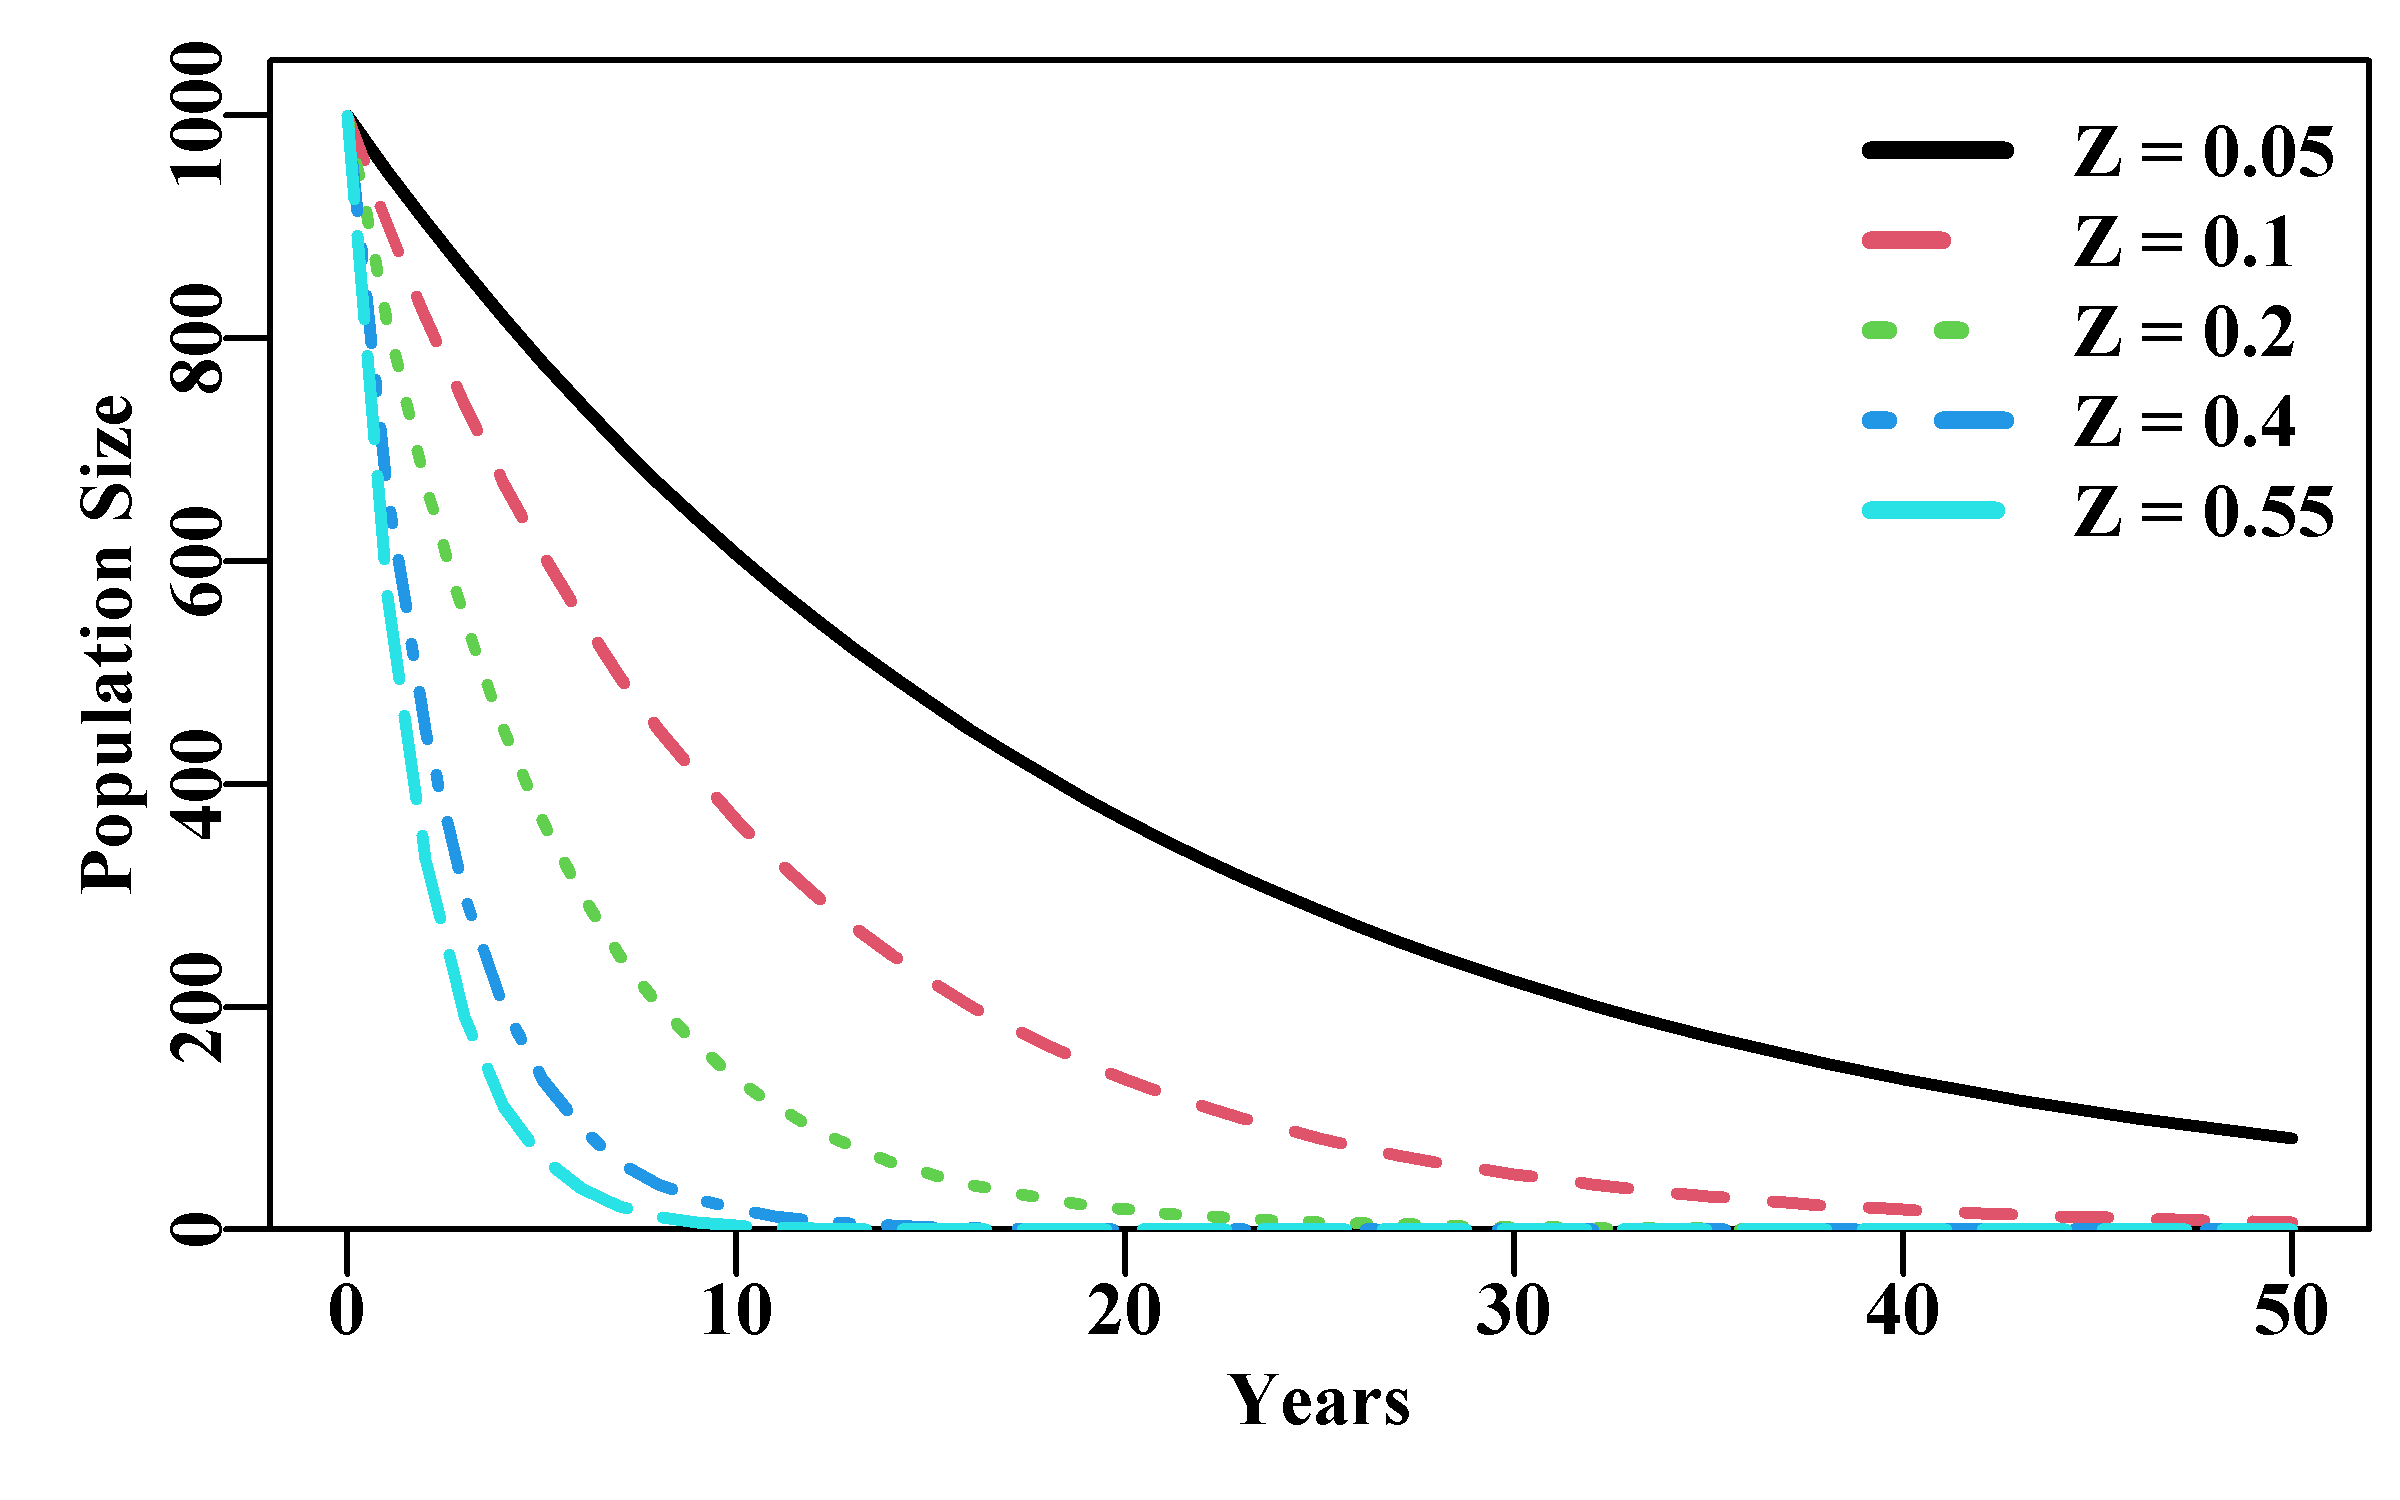 Exponential population declines under different levels of total mortality. The top curve is Z = 0.05 and the steepest curve is Z = 0.55.